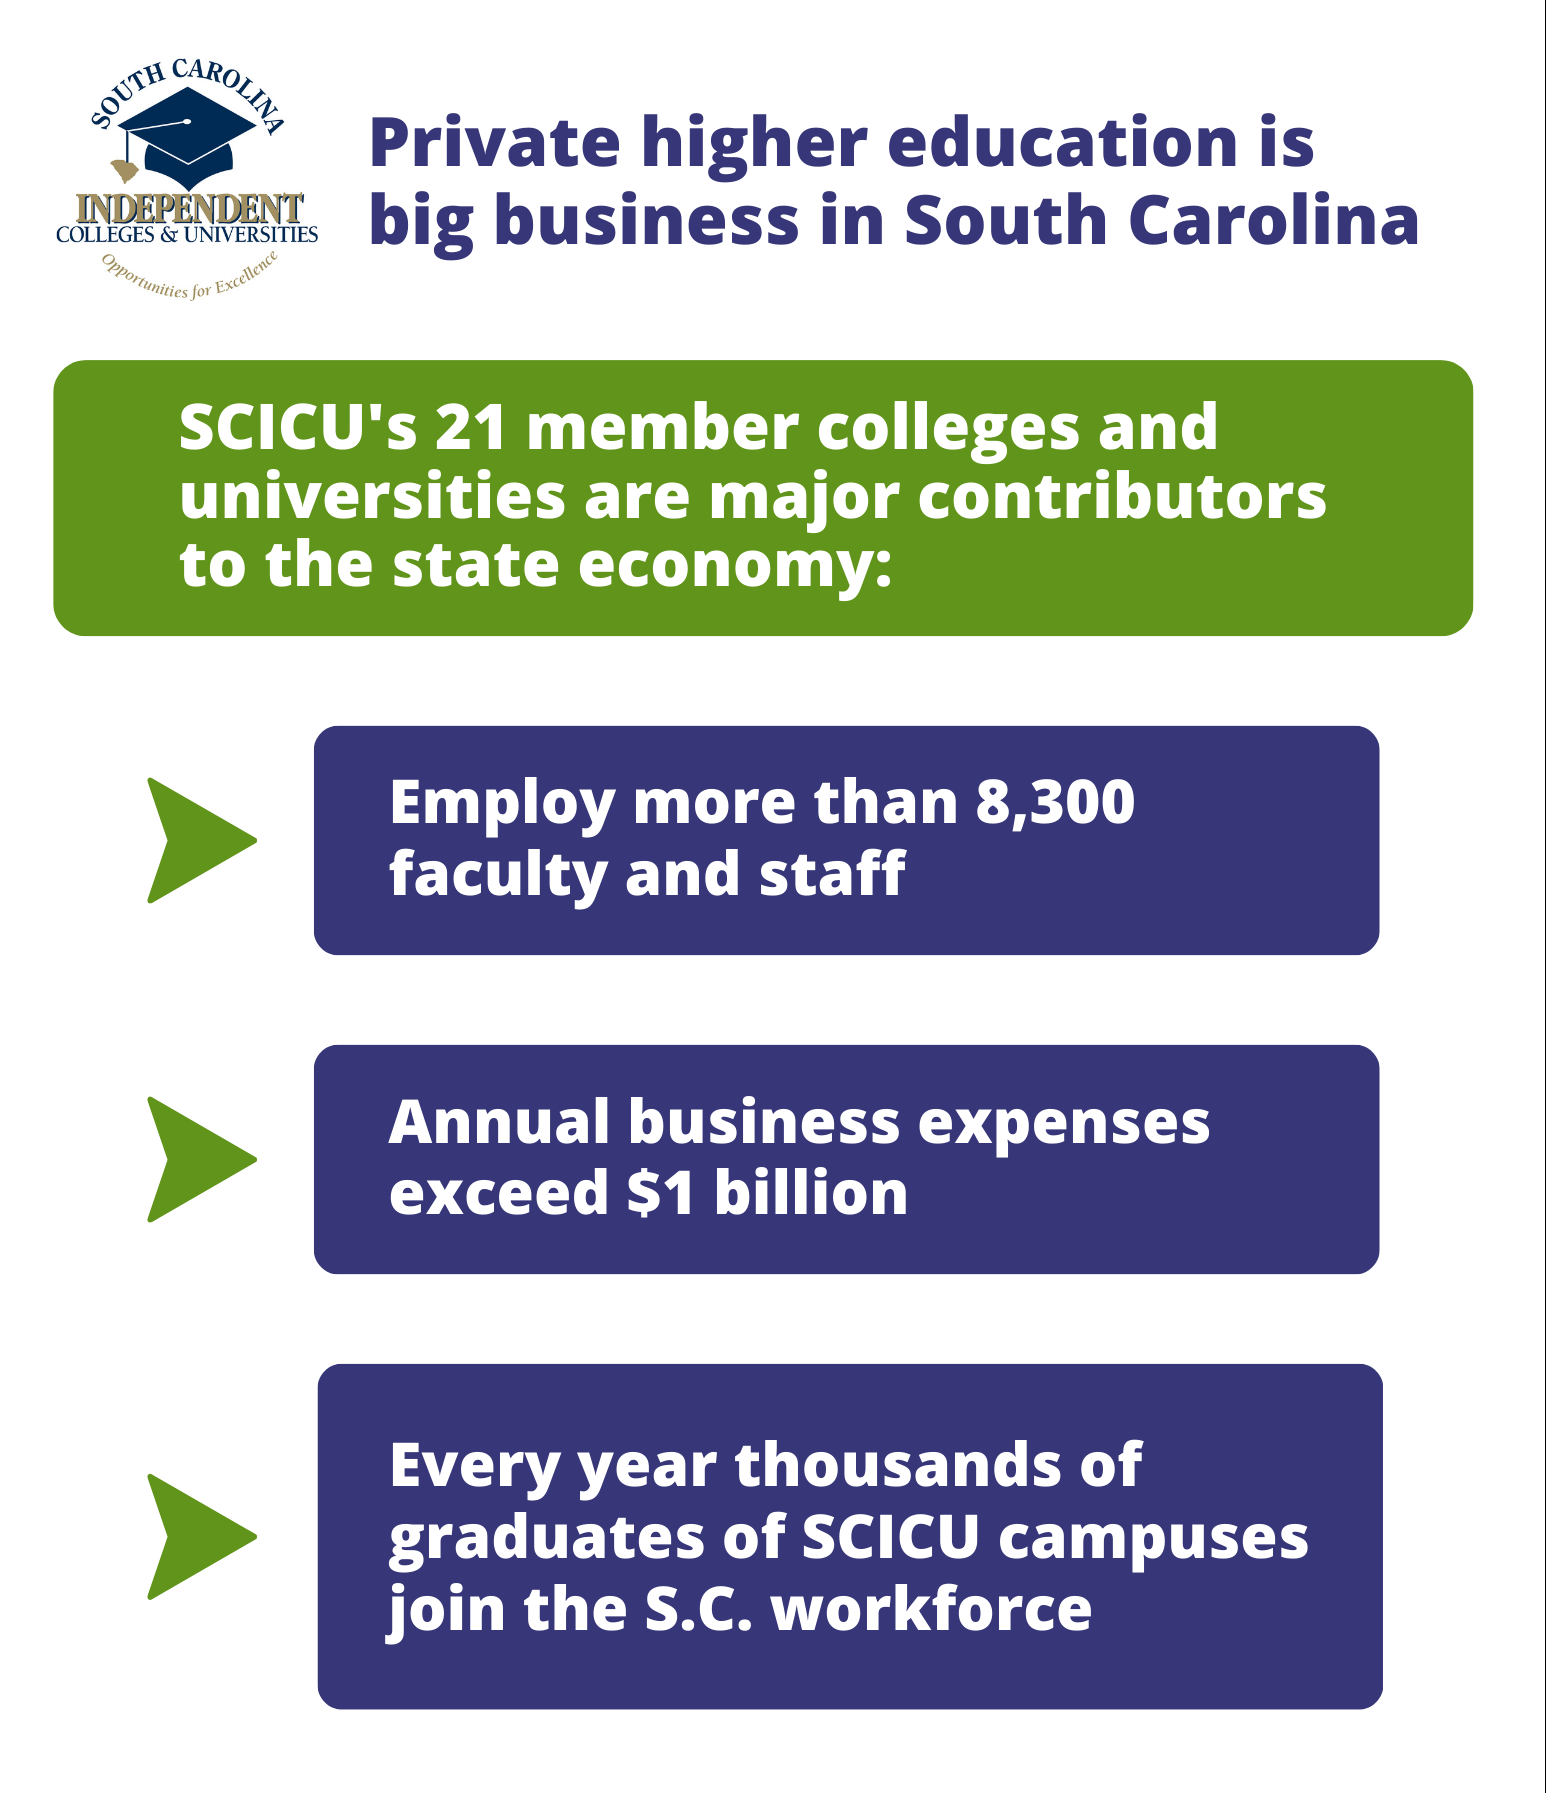 SCICU Infographic: Private higher education is big business in South Carolina